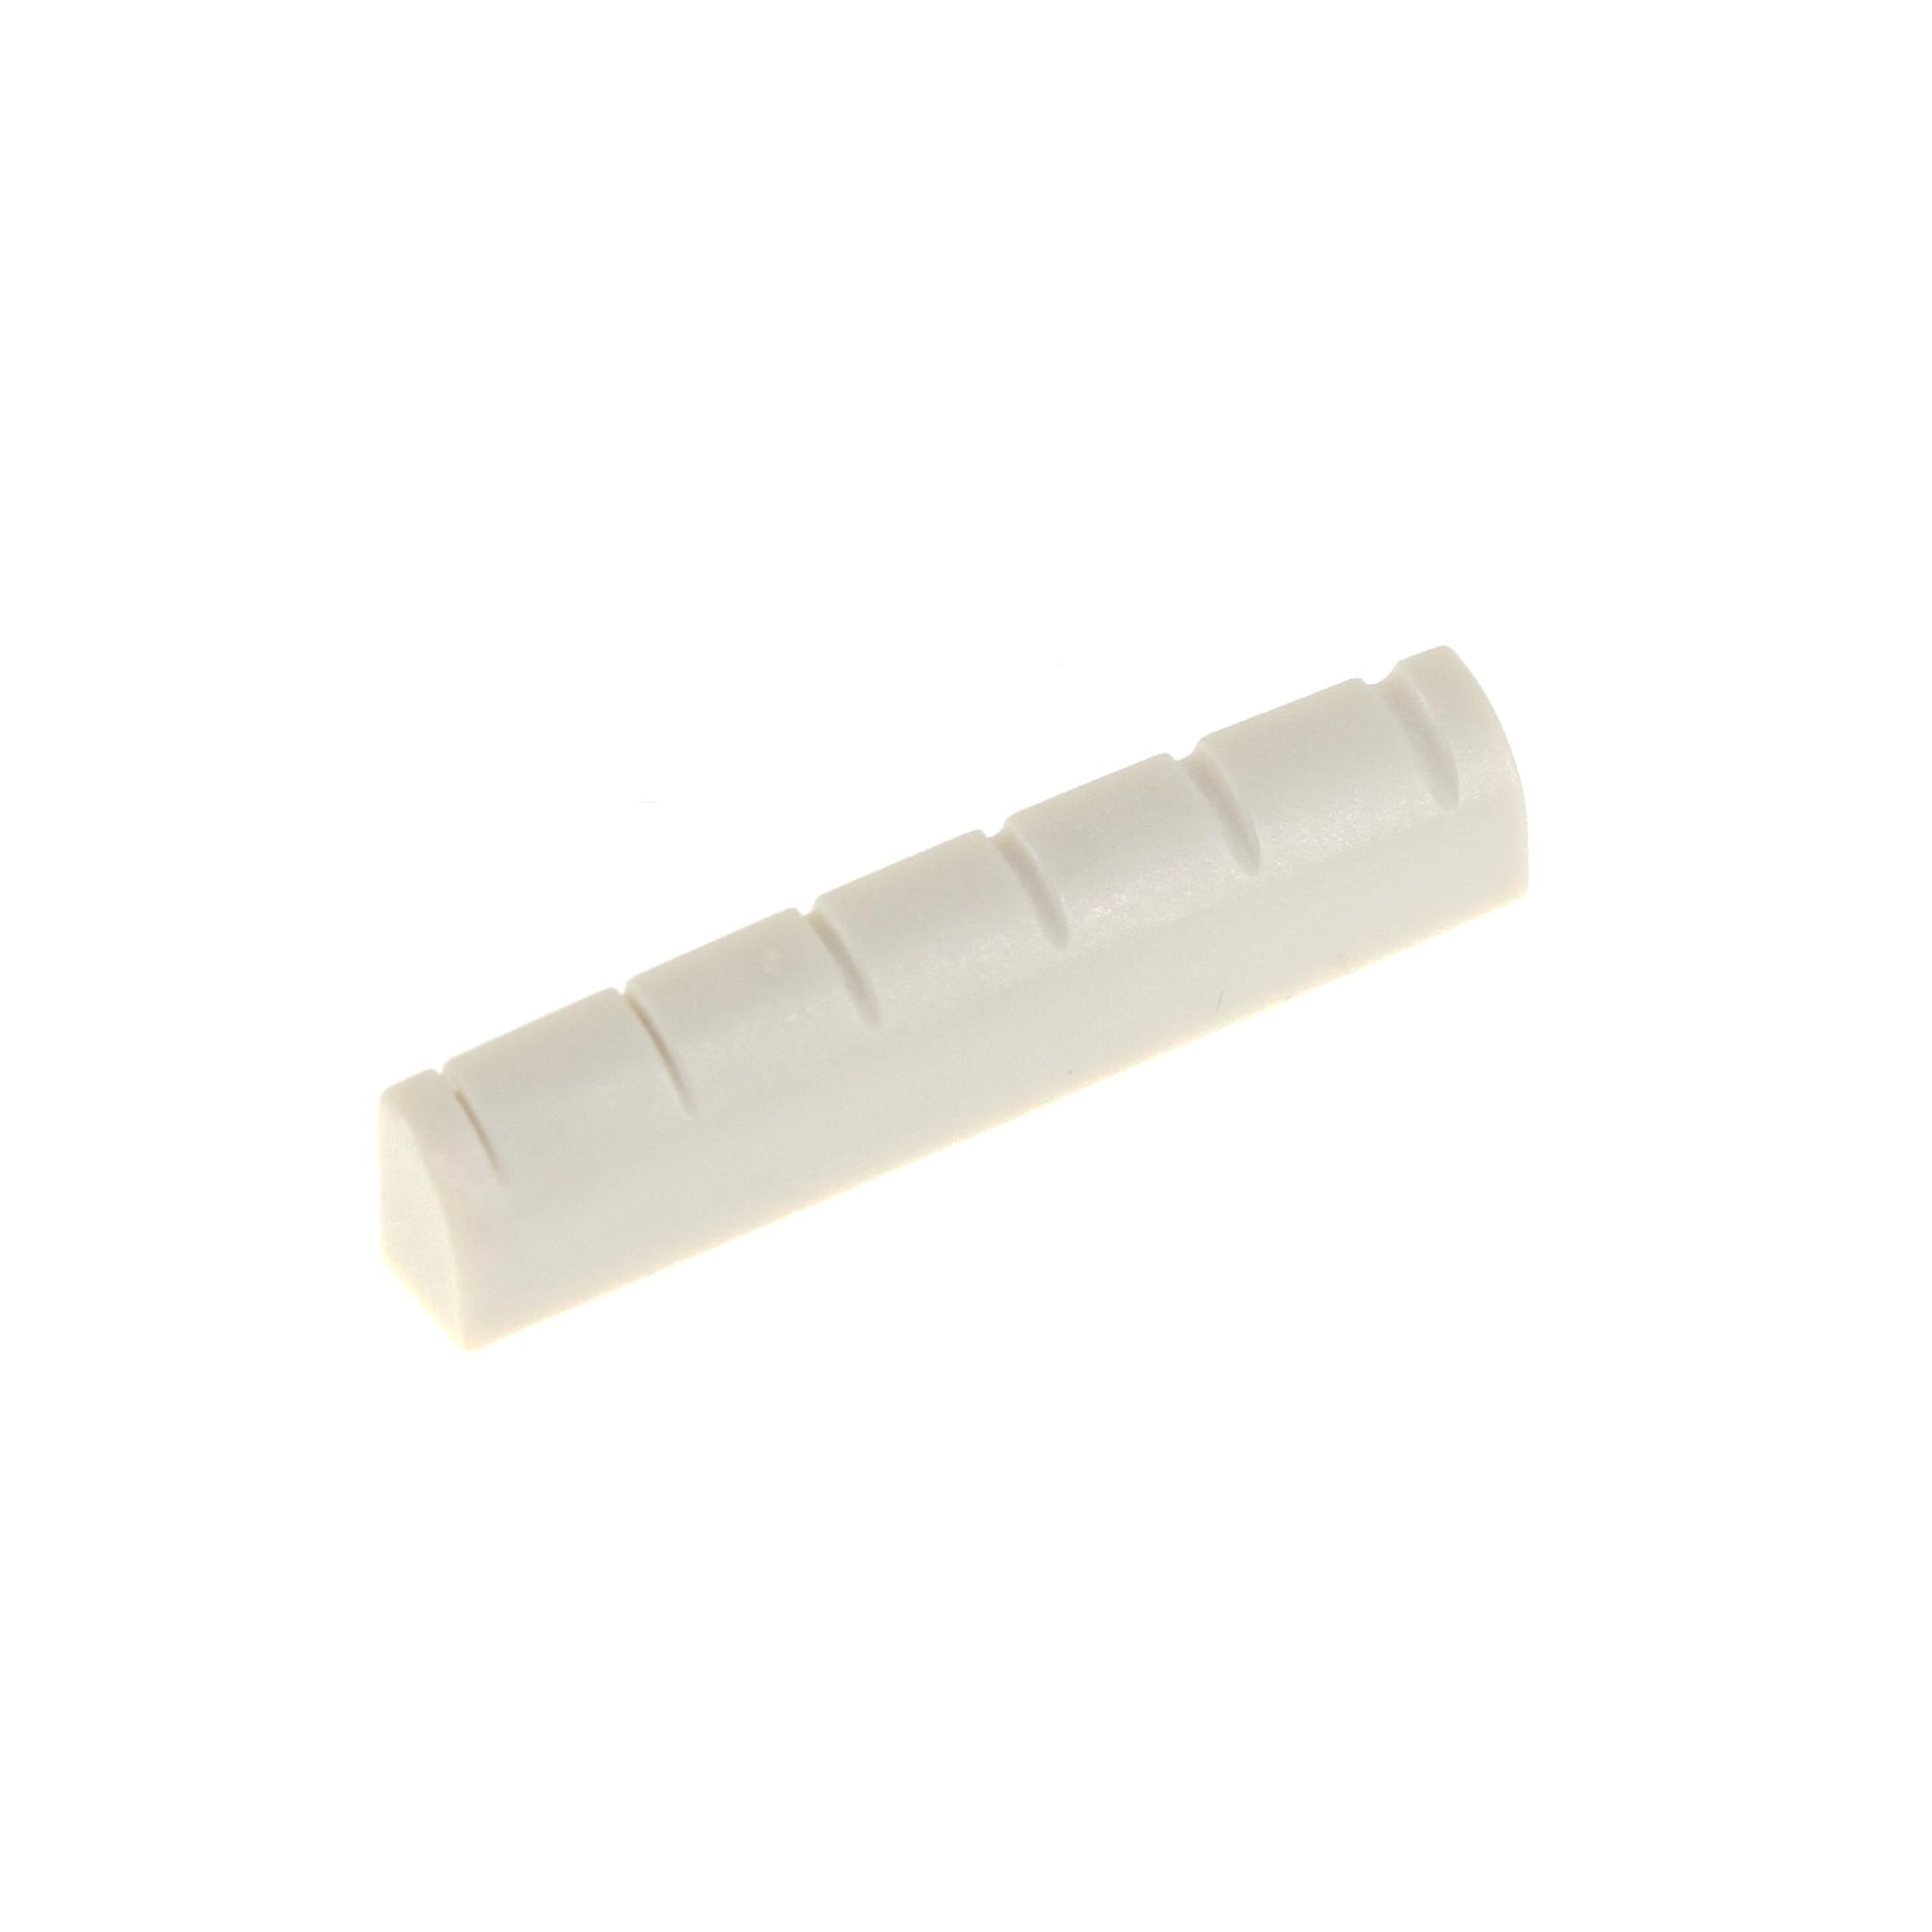 TUSQ Slotted Nut 1.75" Compatible for Martin Style Guitar (PQ-M175-00) - Graph Tech Guitar Labs Ltd.